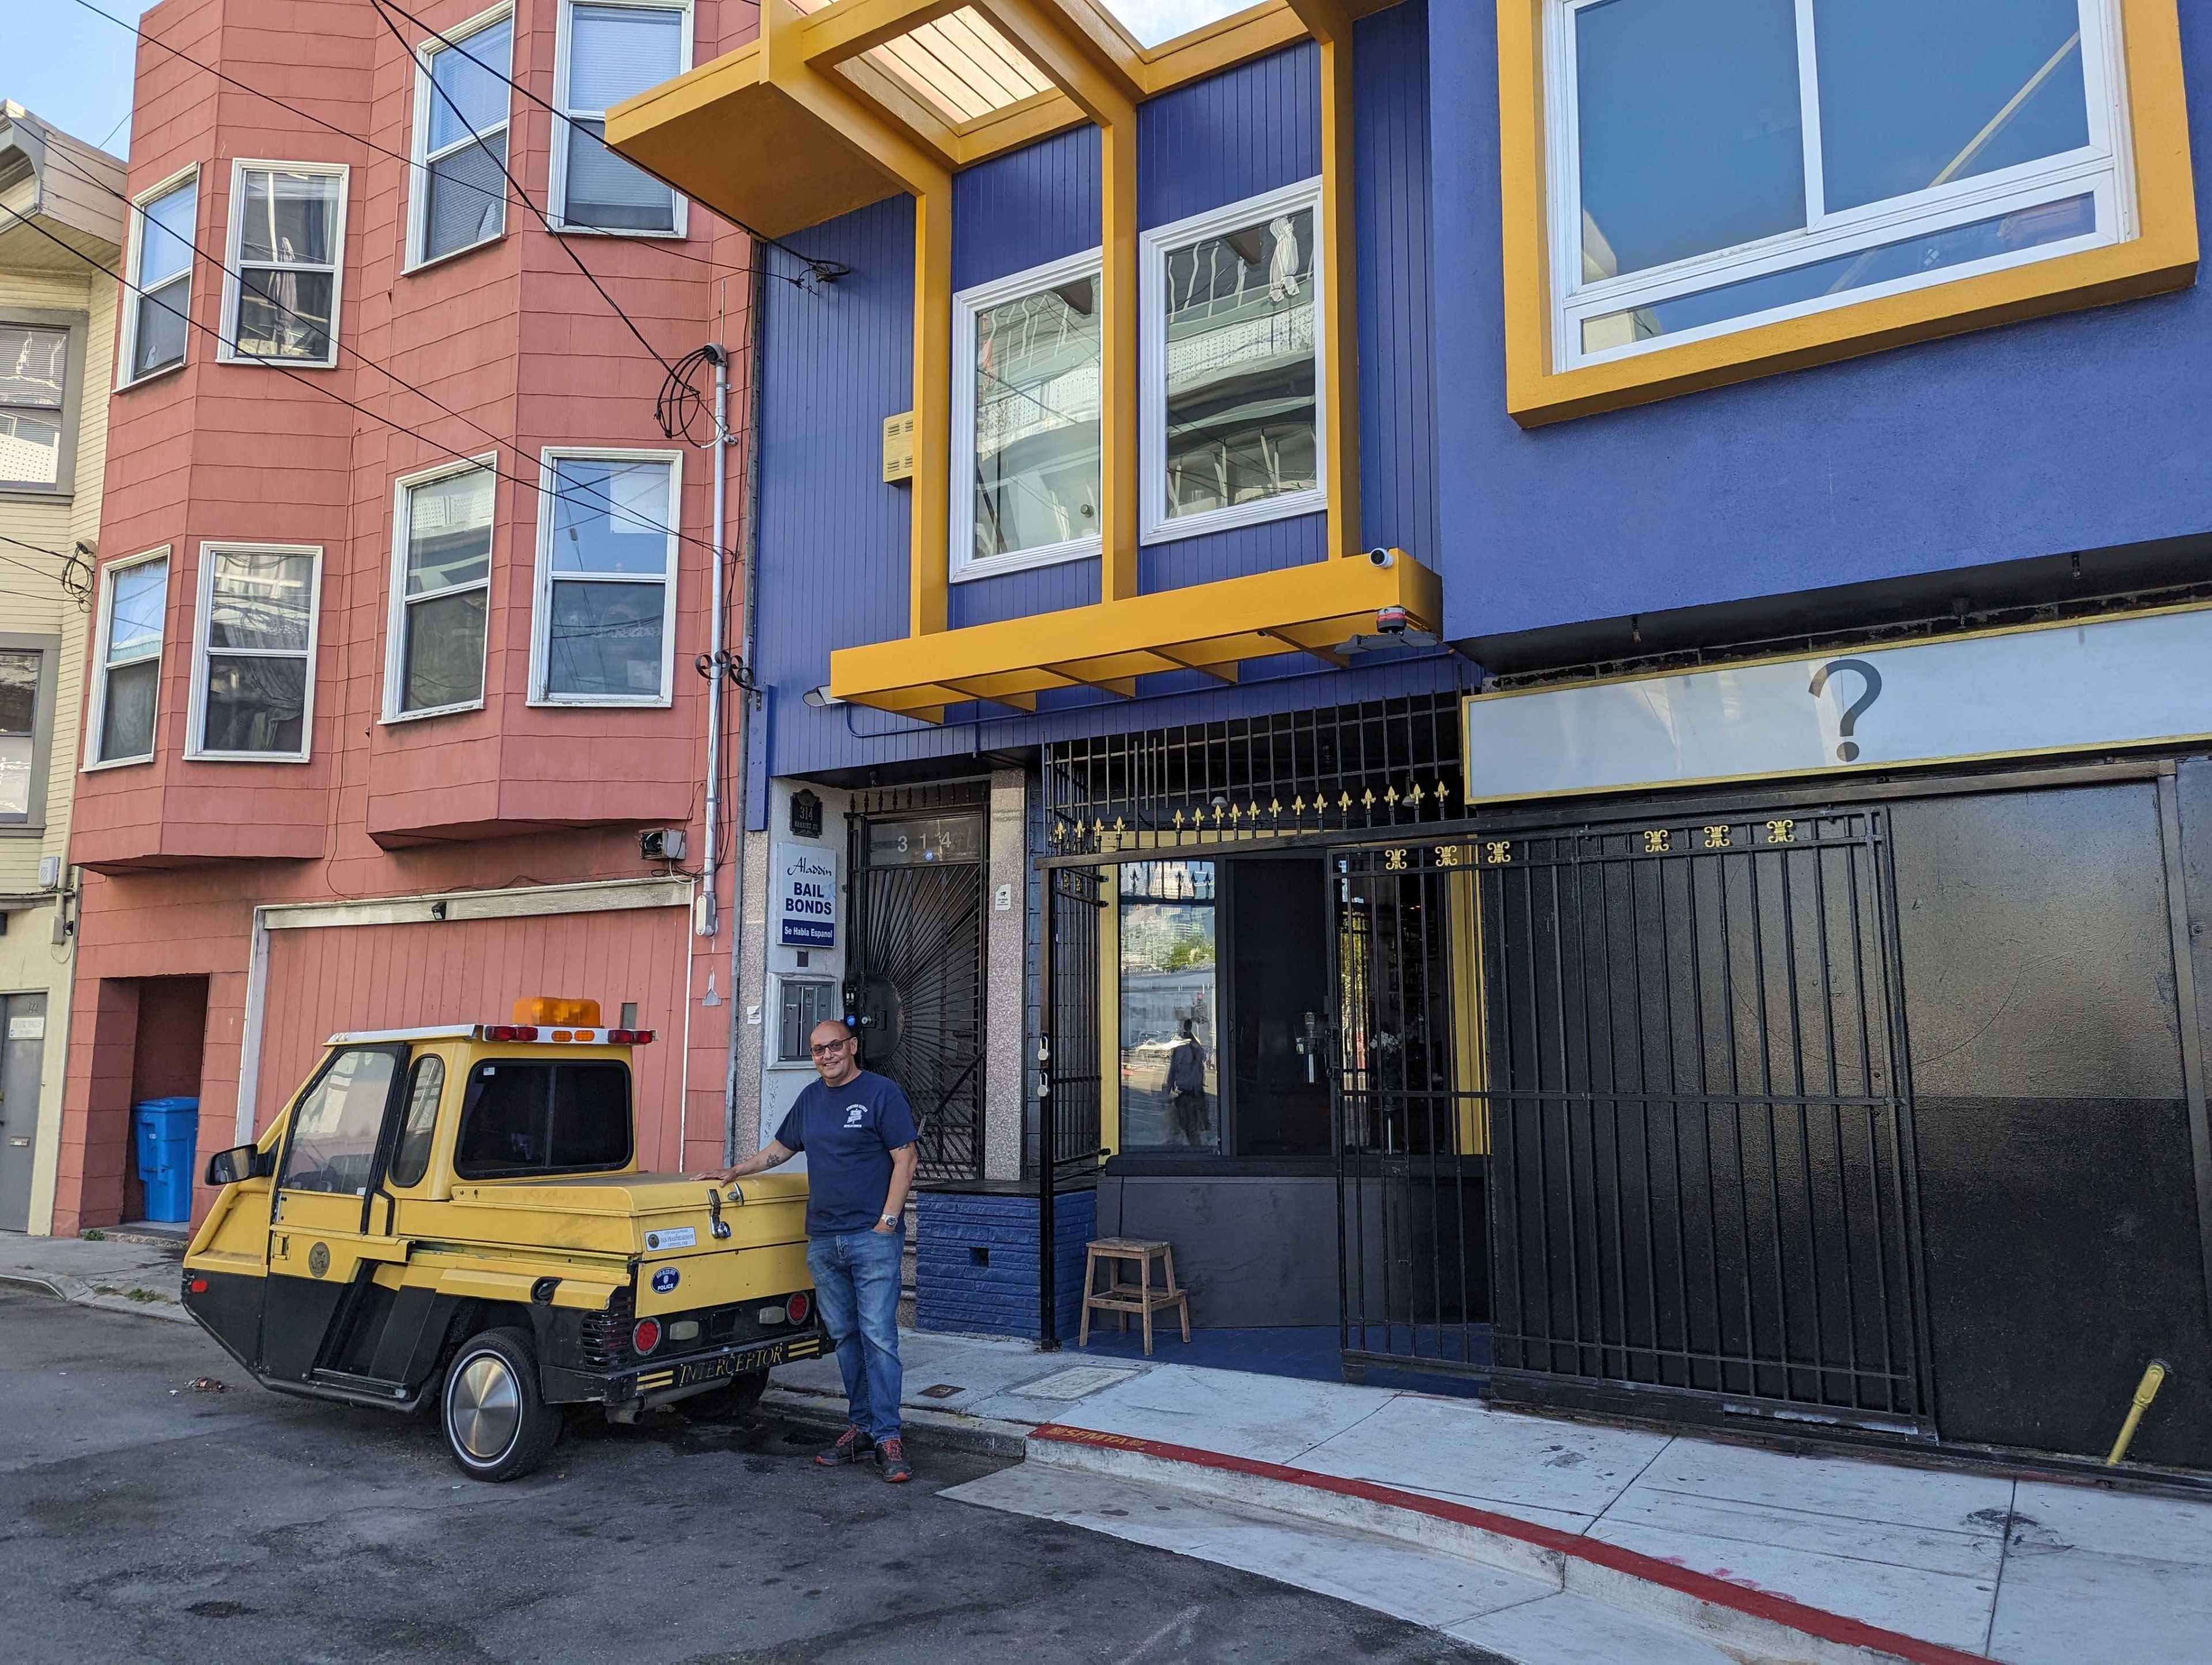 Bar owner Jeremy Paz stands outside his new bar Sunday at 312 Harriet St. in the city's South of Market neighborhood.